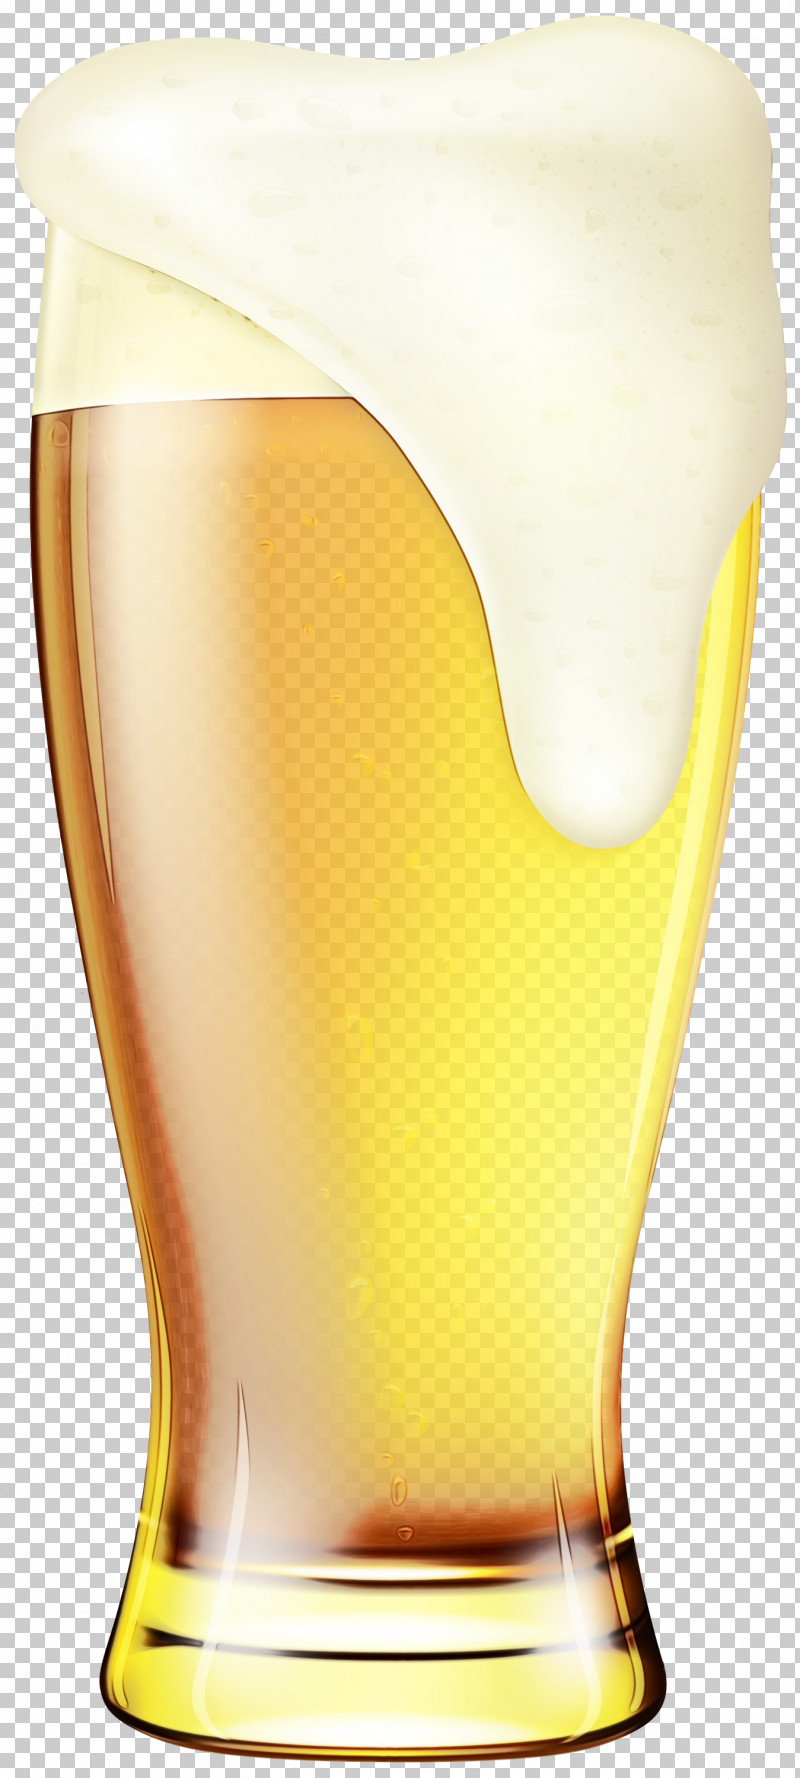 Beer Glass Pint Glass Pint Glass Yellow PNG, Clipart, Beer Glass, Glass, Paint, Pint, Pint Glass Free PNG Download